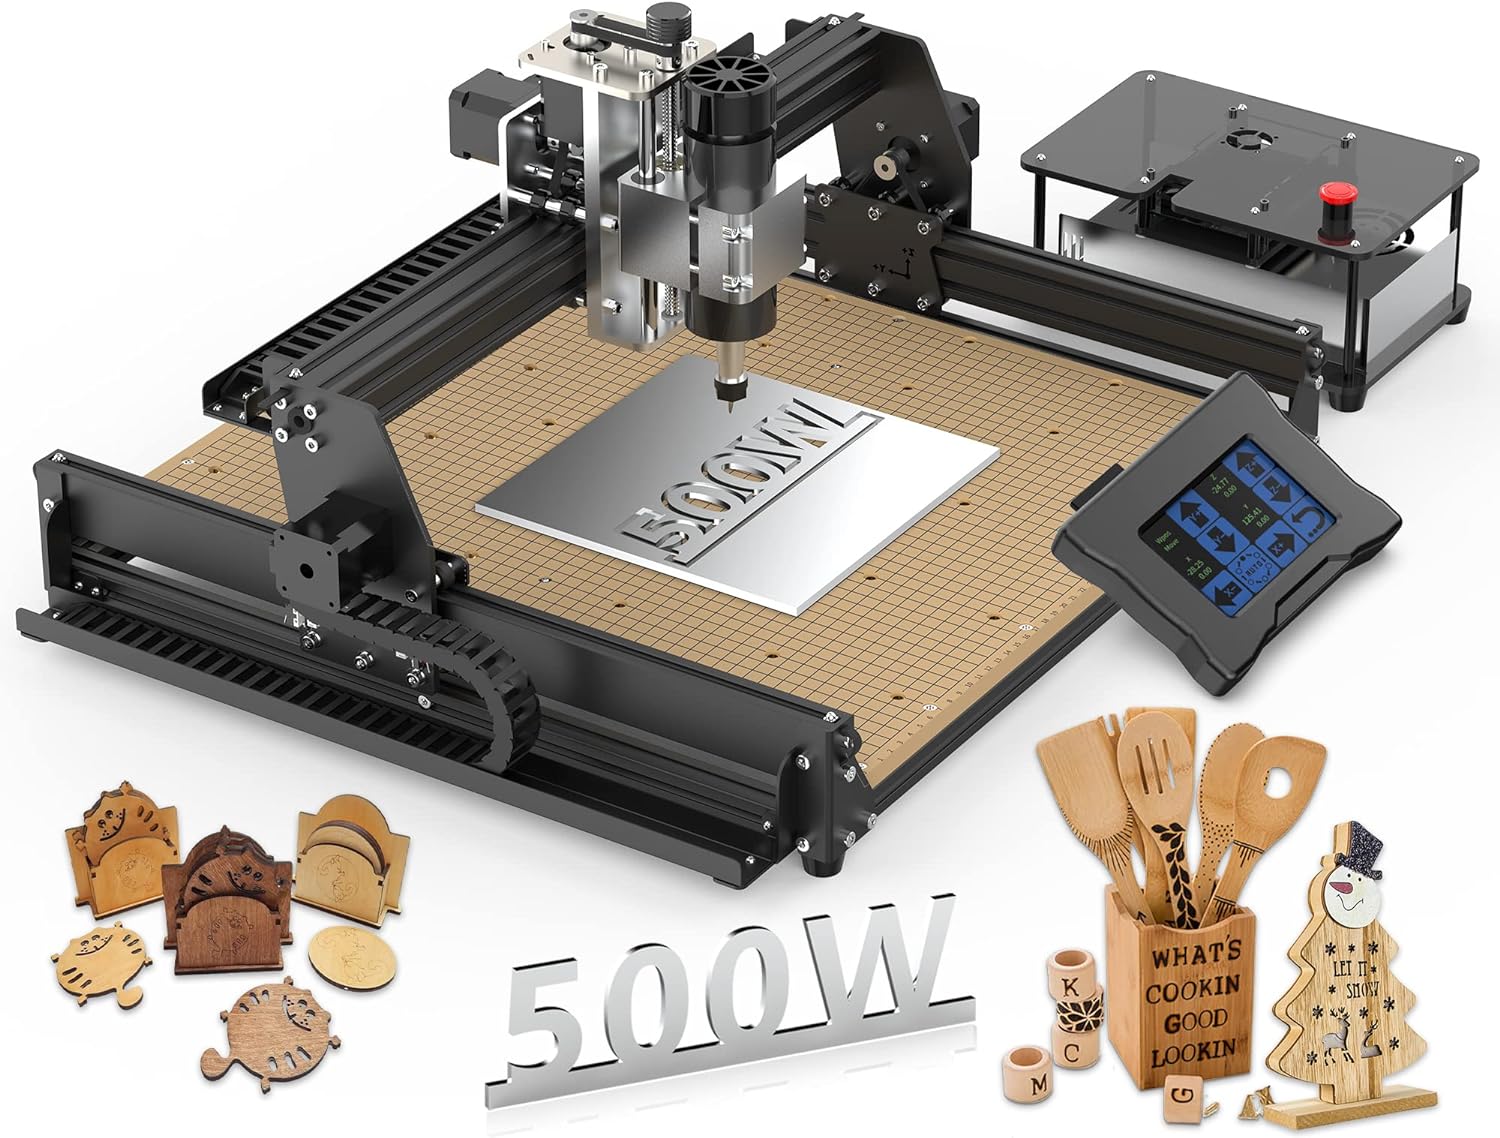 500W CNC Router Machine, MYSWEETY 4540 CNC Wood Router 3 Axis Metal Milling Machine for Engraving Carving Wood Acrylic MDF PCB Plastic, Working Area: 430 * 390 * 90mm(16.9 * 15.4 * 3.5inch)